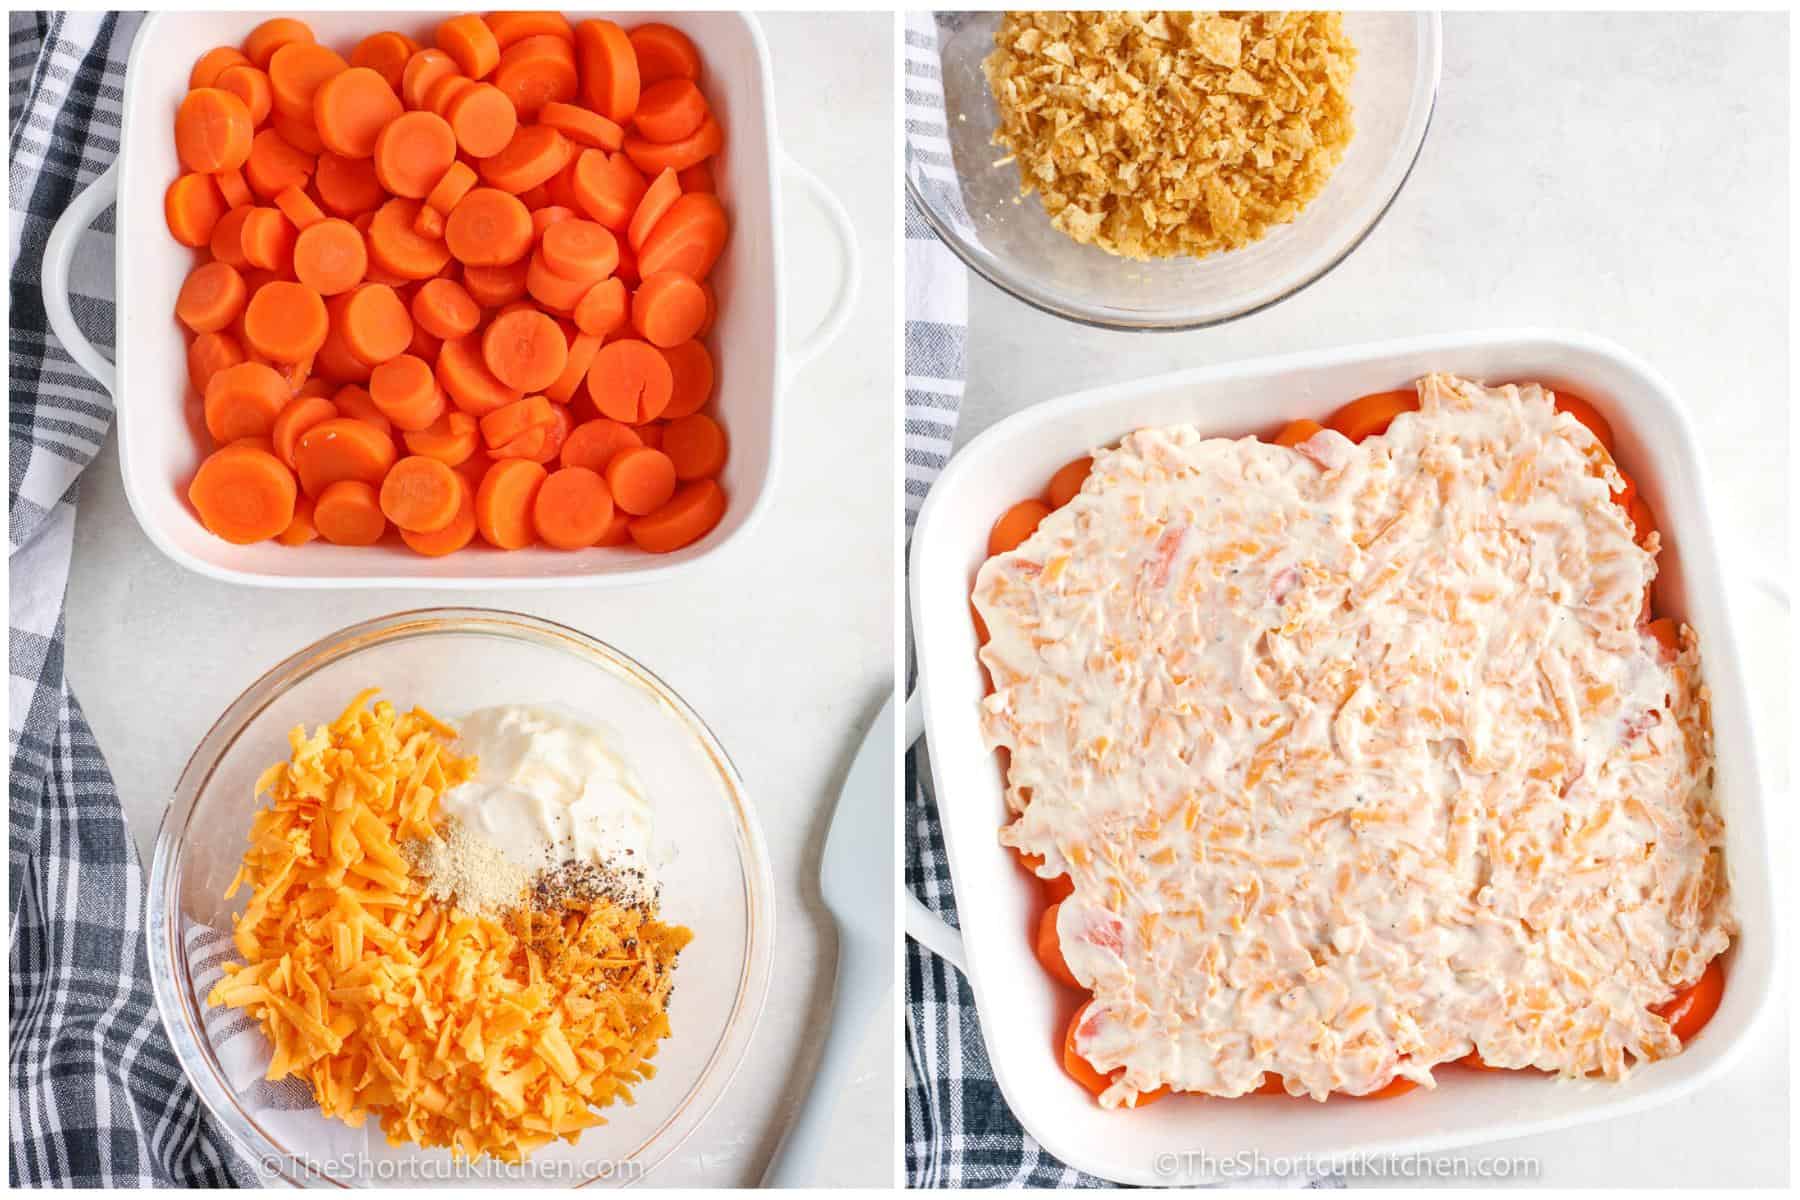 process of adding cheese mix to carrots to make Carrot Casserole